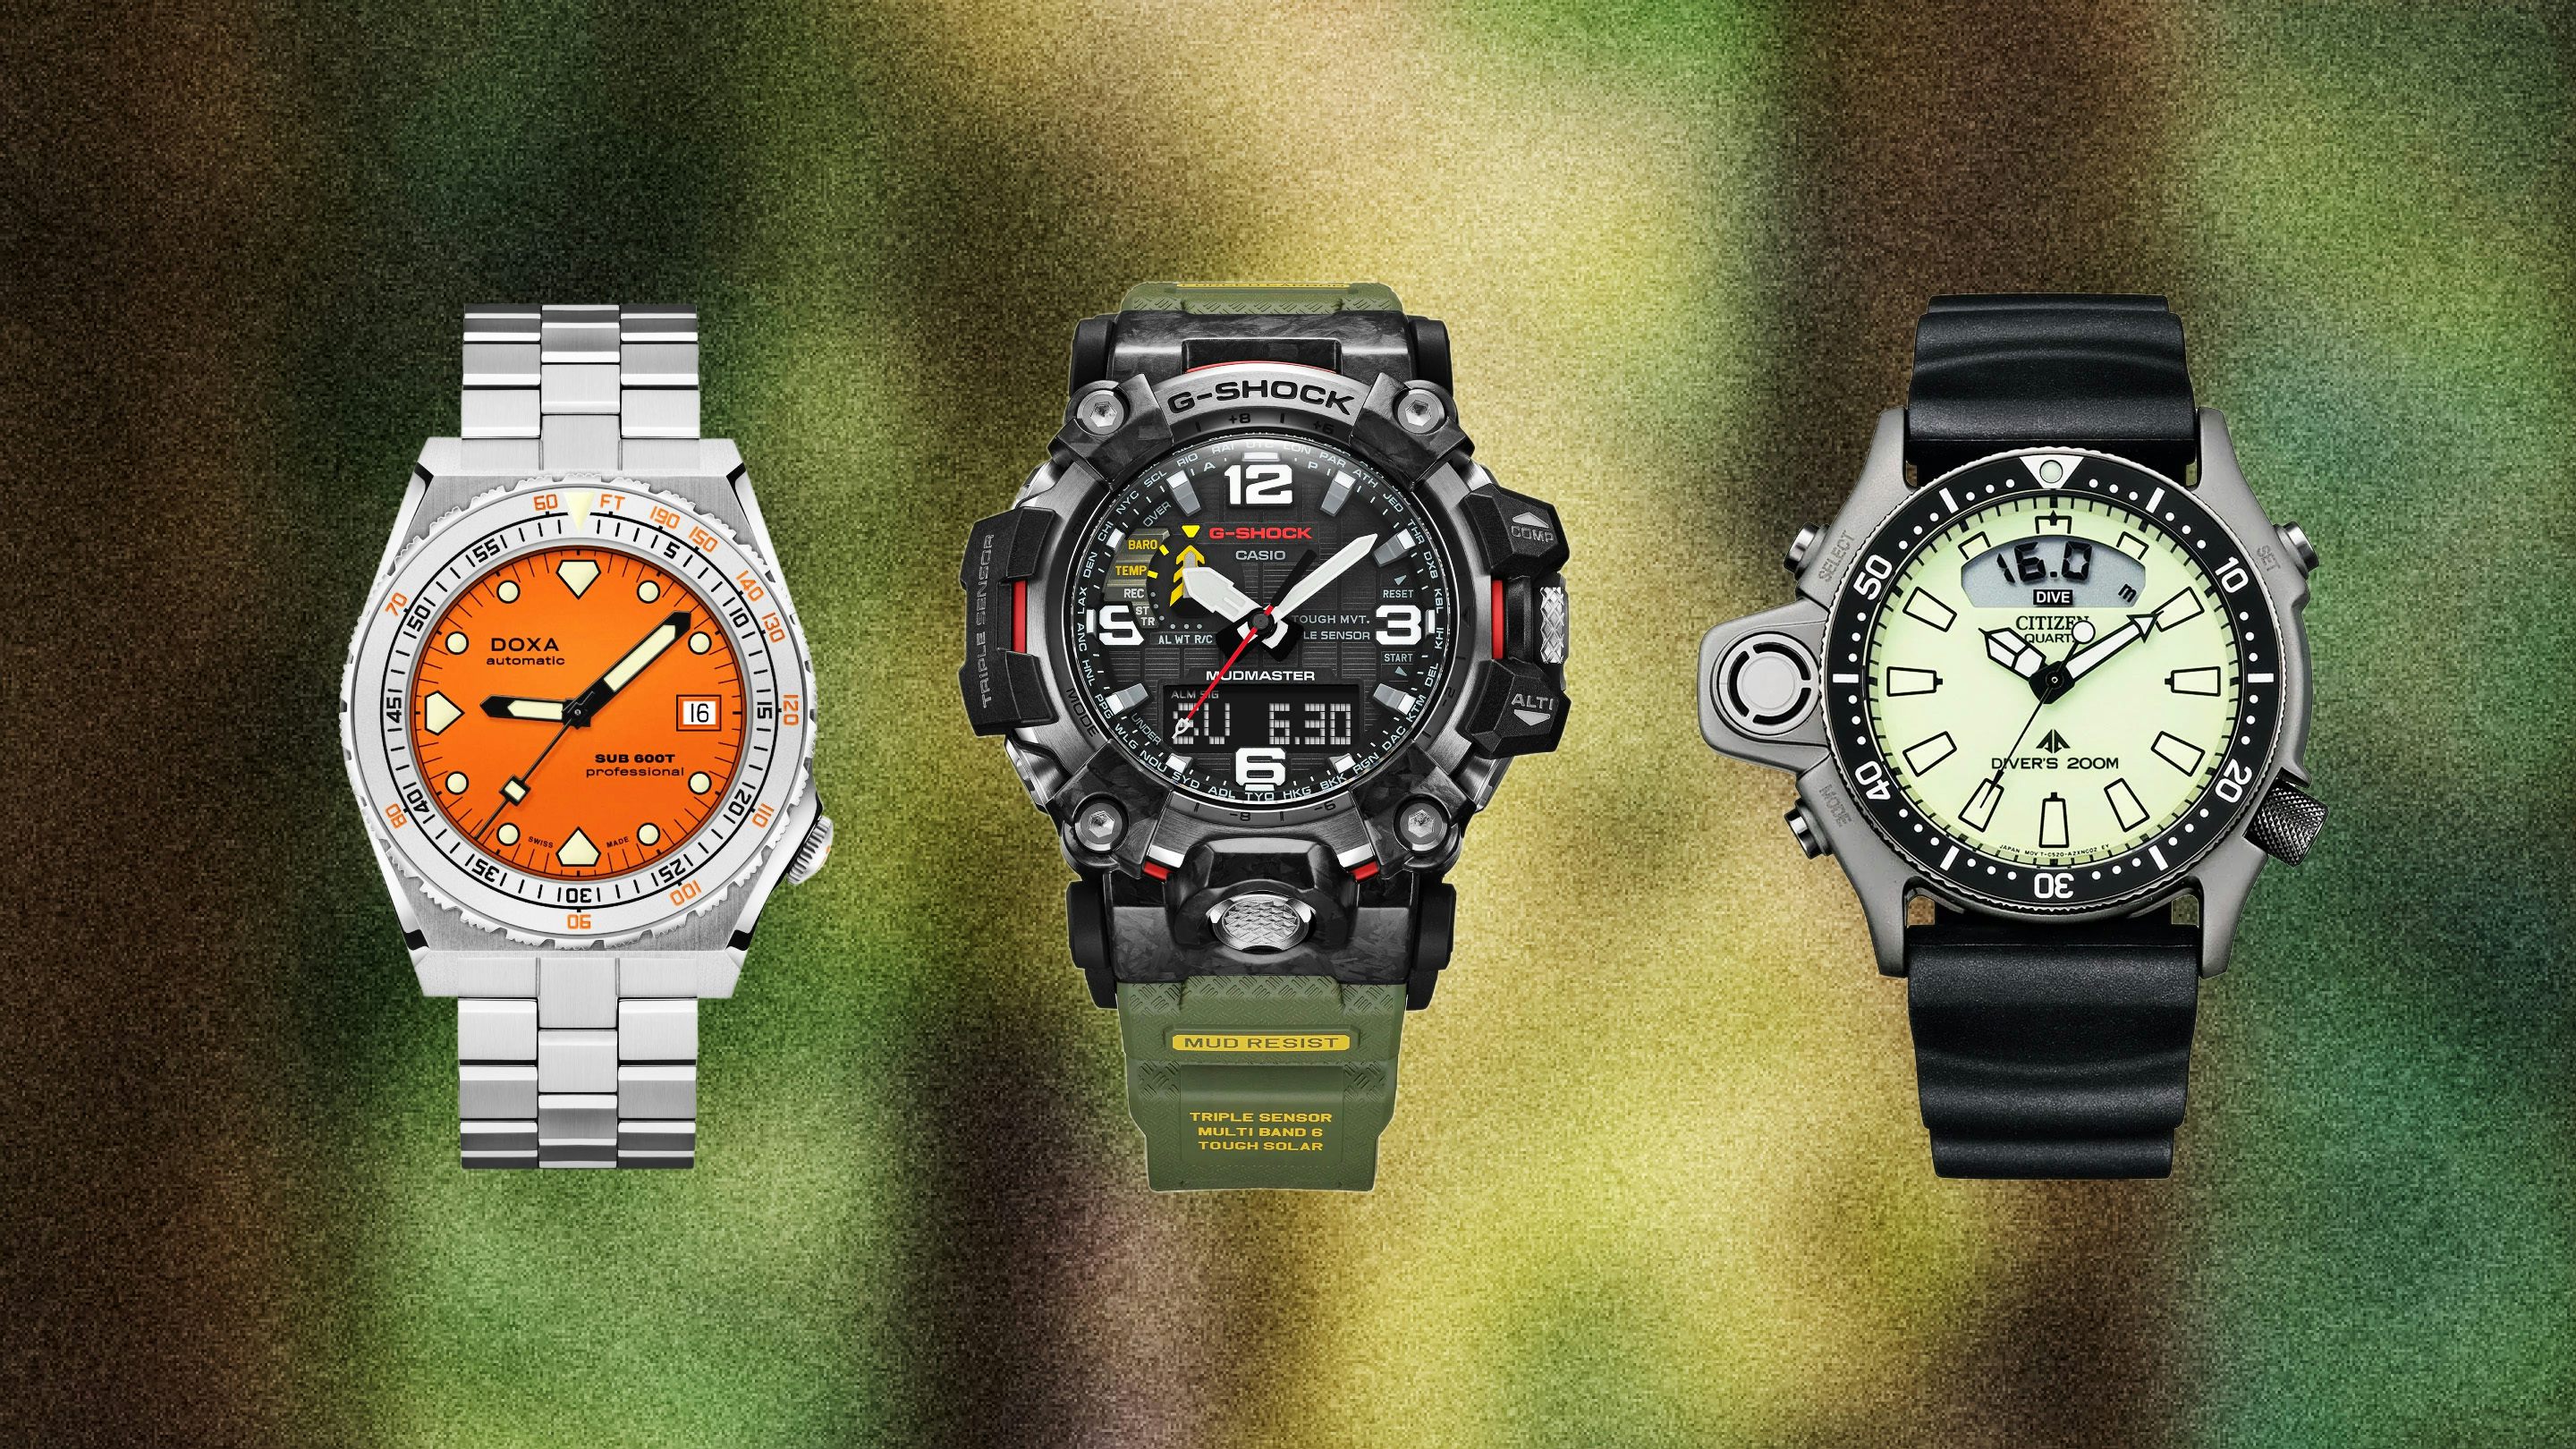 CASIO PRO TREK — functional watches for outdoor enthusiasts